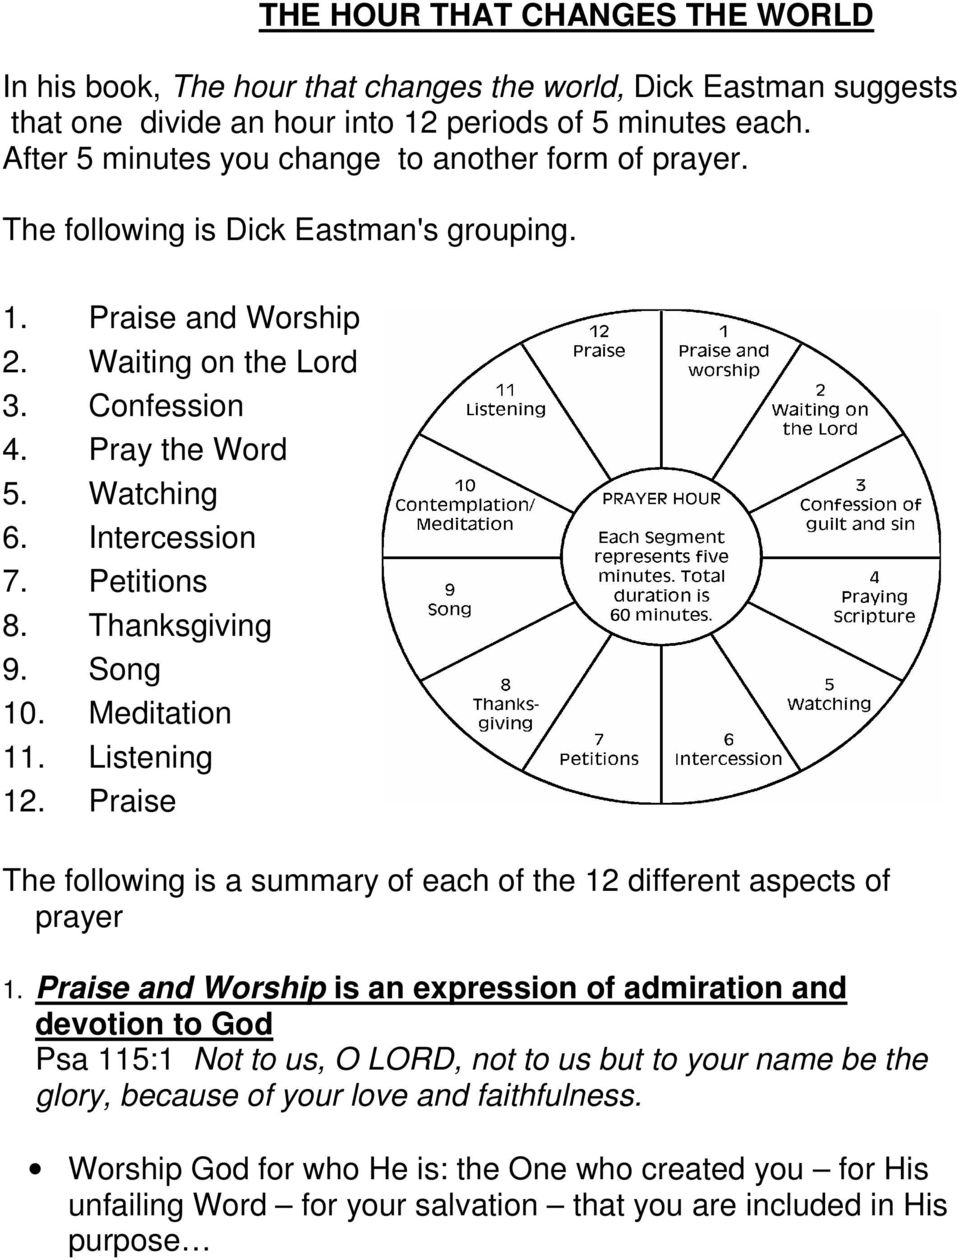 Intercession 7. Petitions 8. Thanksgiving 9. Song 10. Meditation 11. Listening 12. Praise The following is a summary of each of the 12 different aspects of prayer 1.